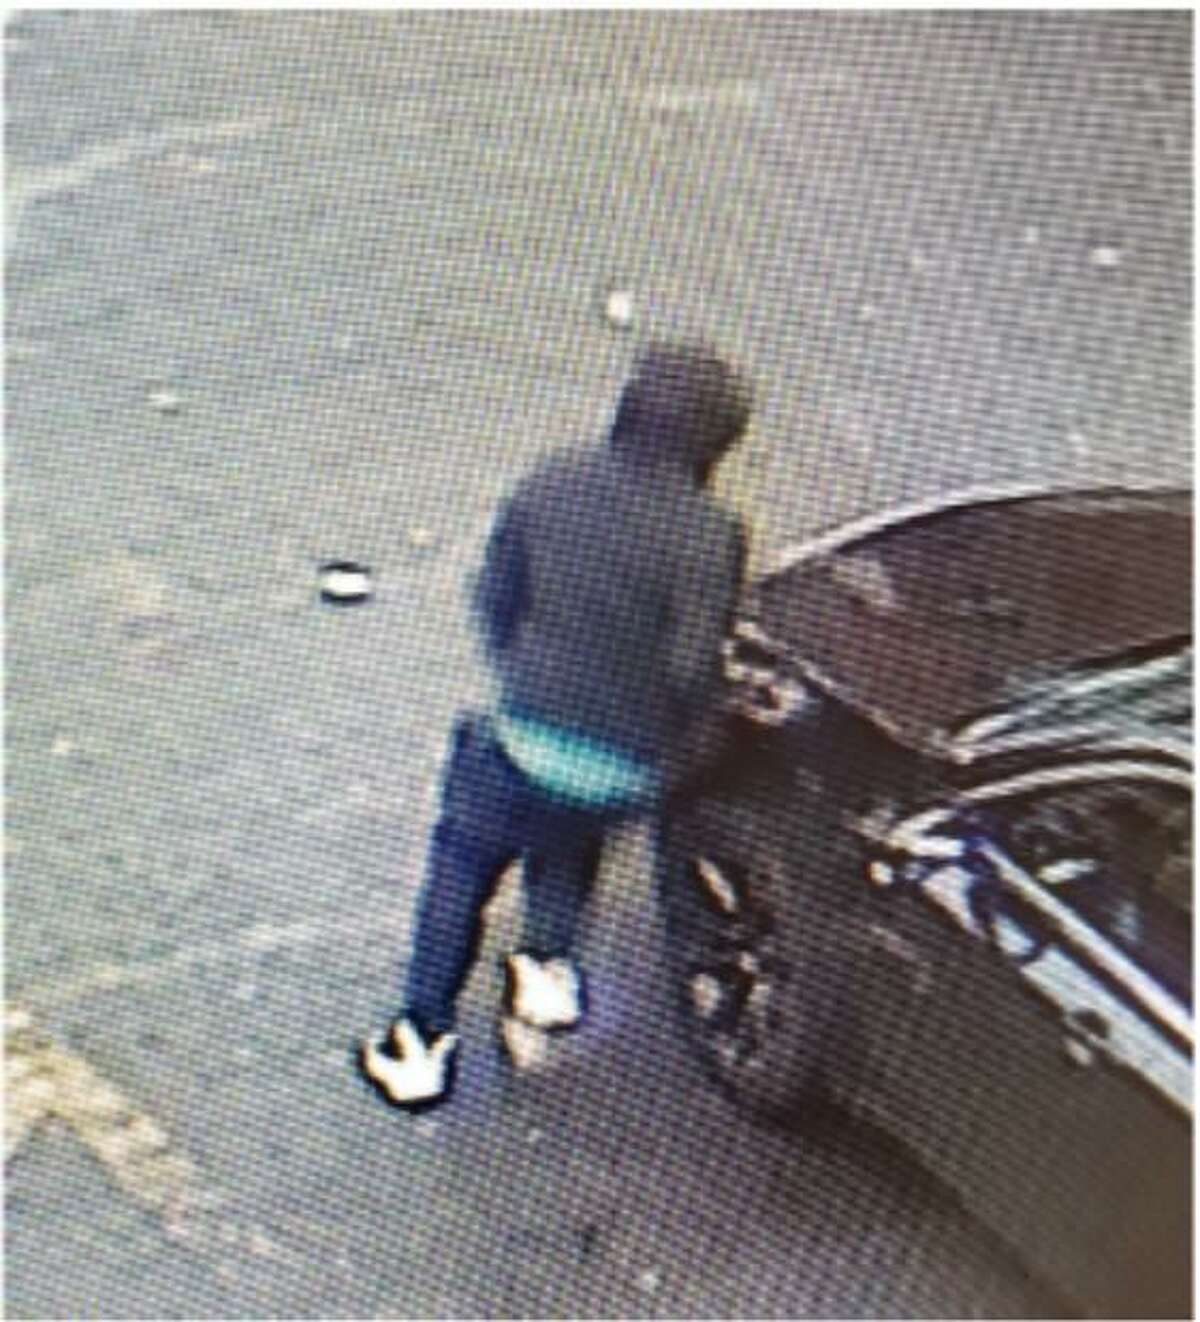 Police have released these surveillance stills of a suspect in a shooting in Bridgeport, Conn. on Saturday, Oct. 30 that left two young children and their grandmother injured.